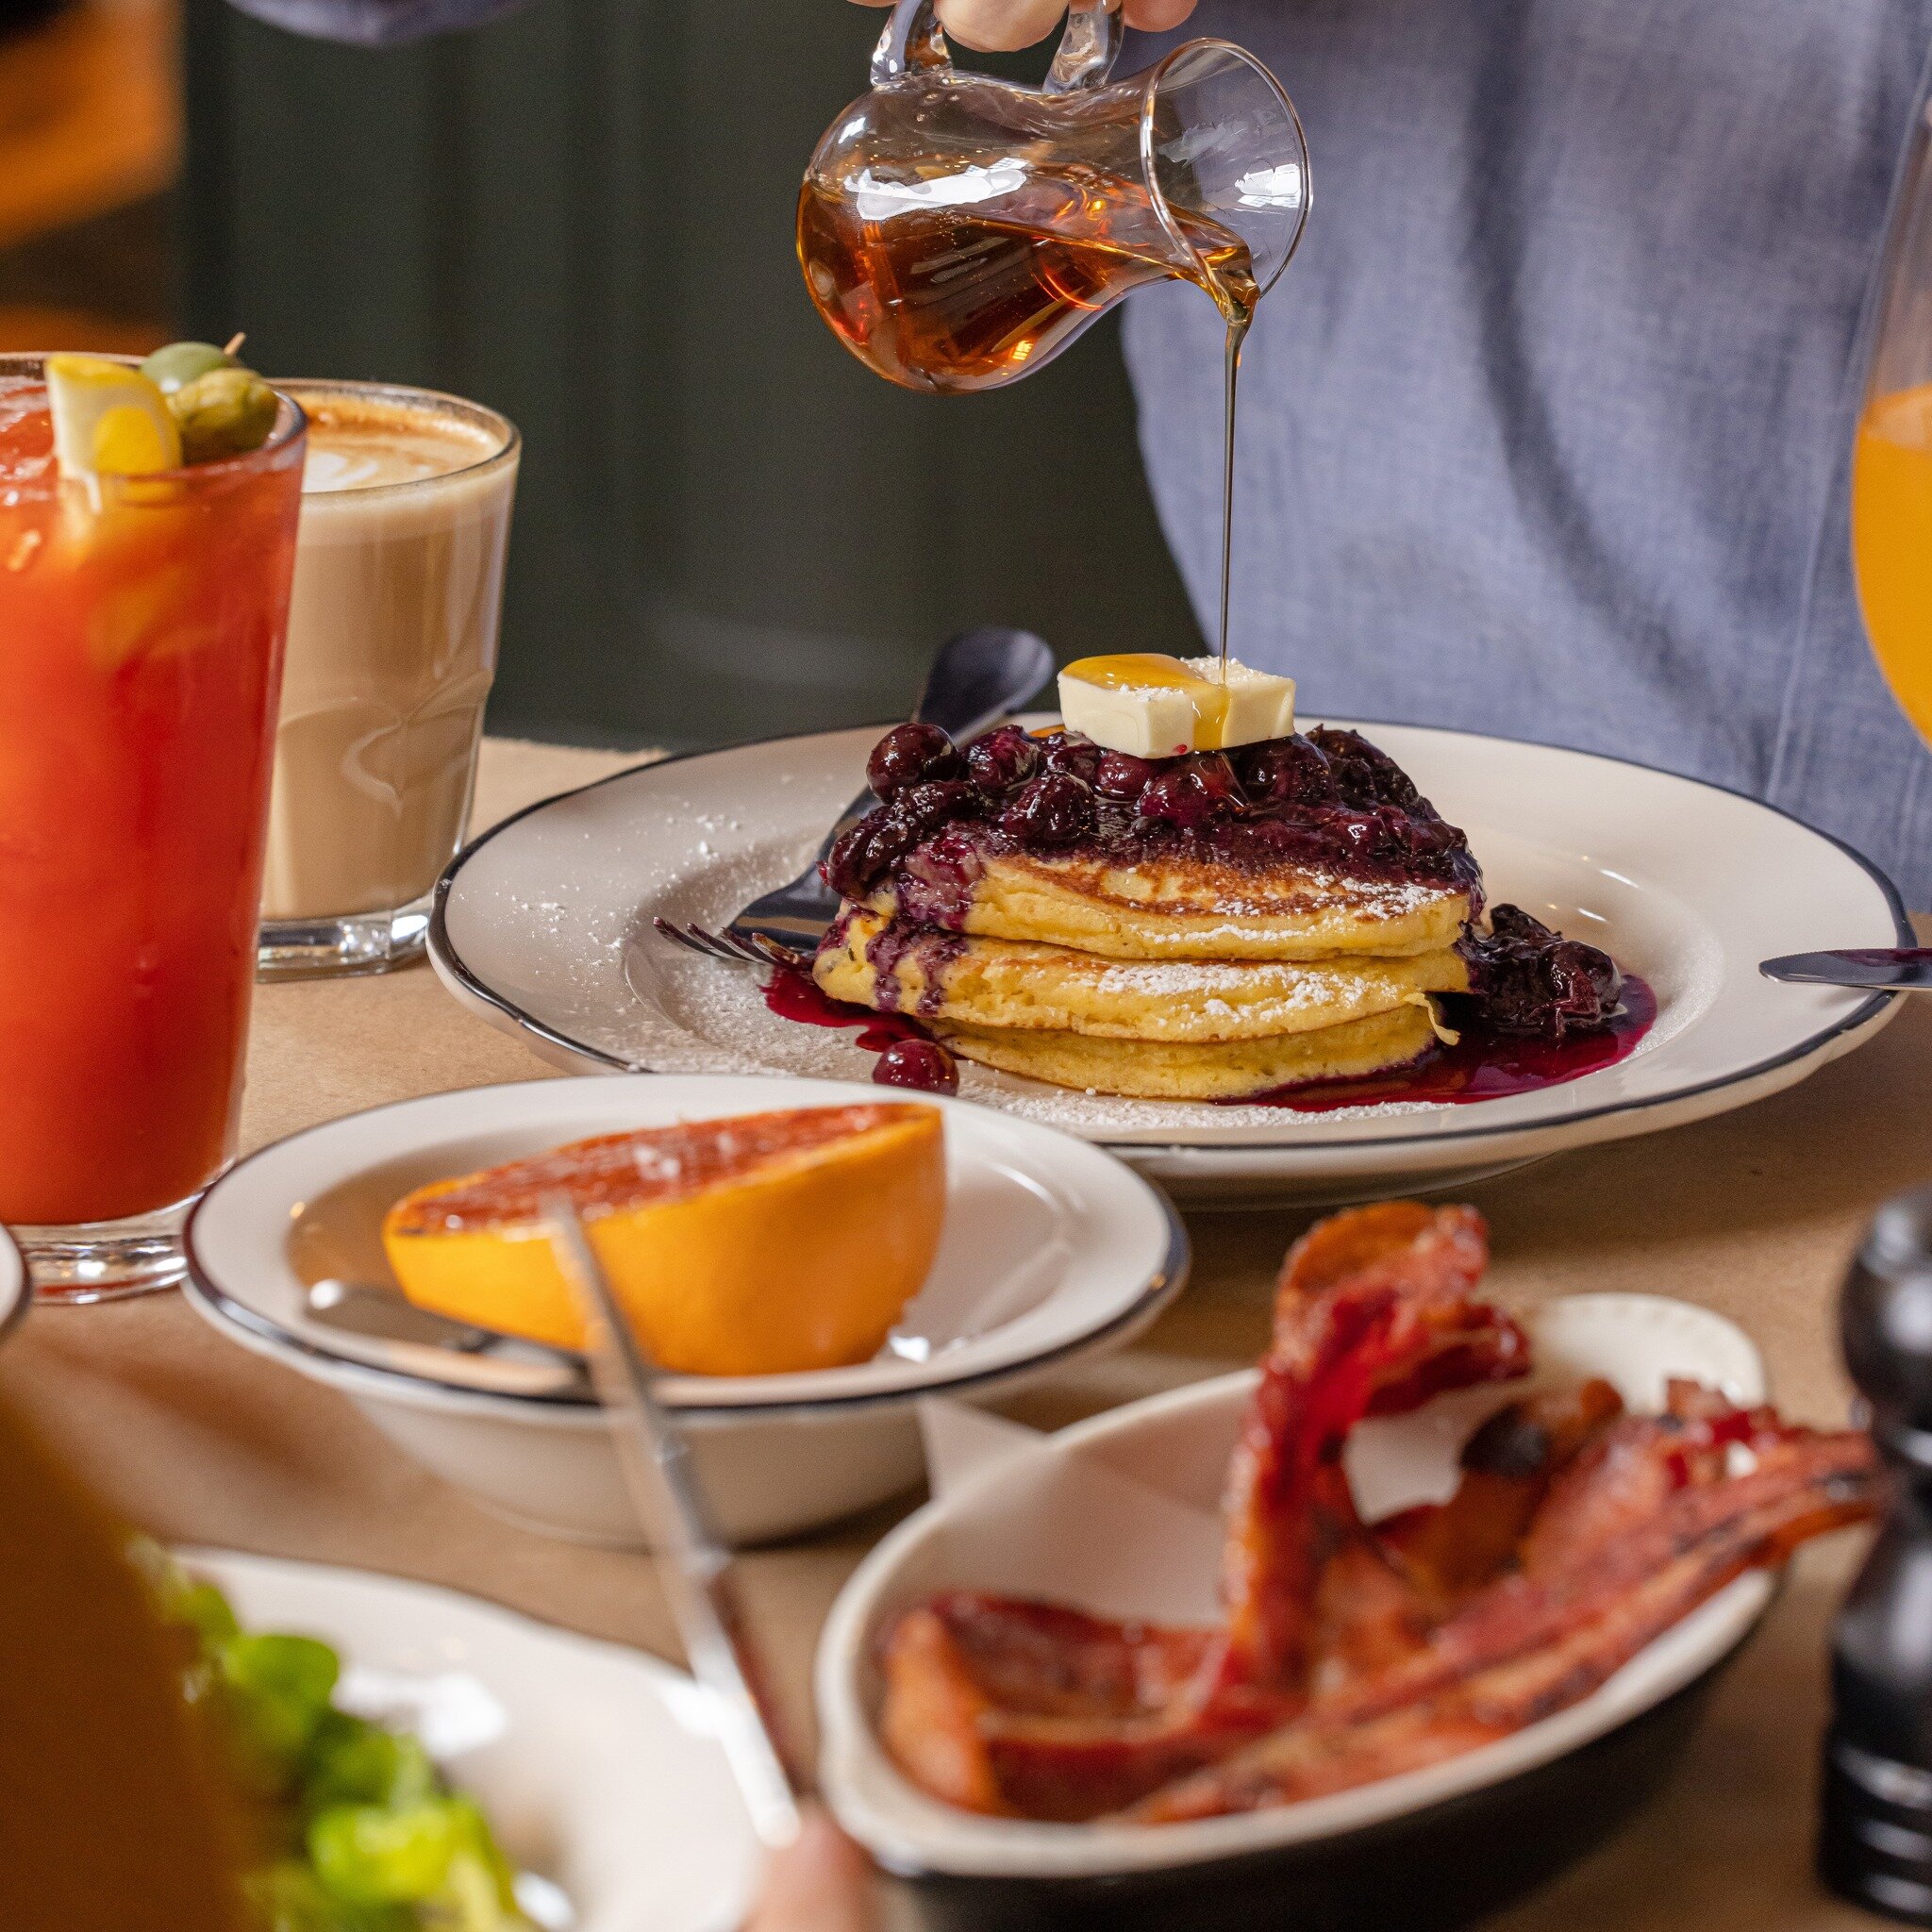 Brunch isn't just for Sundays. Start the weekend right with cocktails, coffee &amp; sweet or savory daytime classics from 10am - 2pm every Saturday